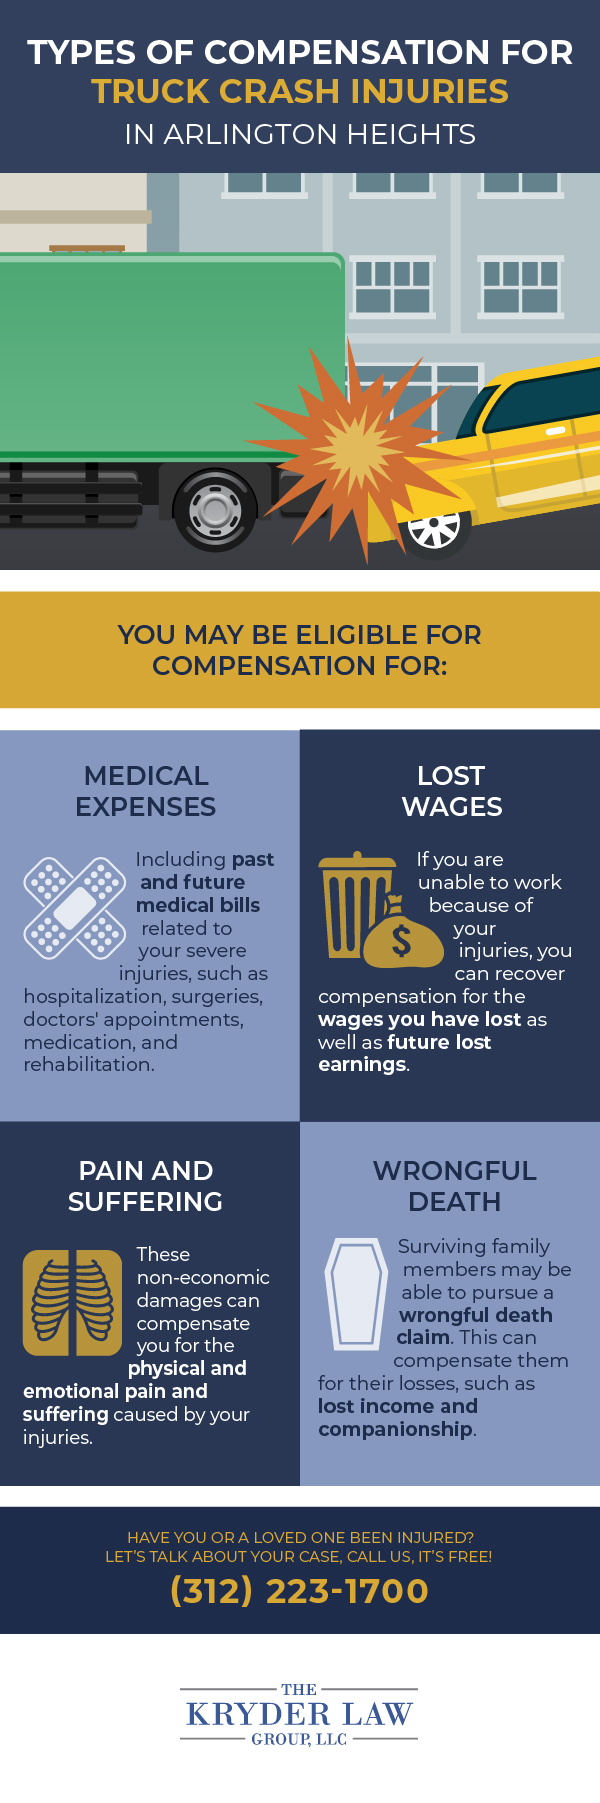 The Benefits of Hiring an Arlington Heights Truck Accident Lawyer Infographic